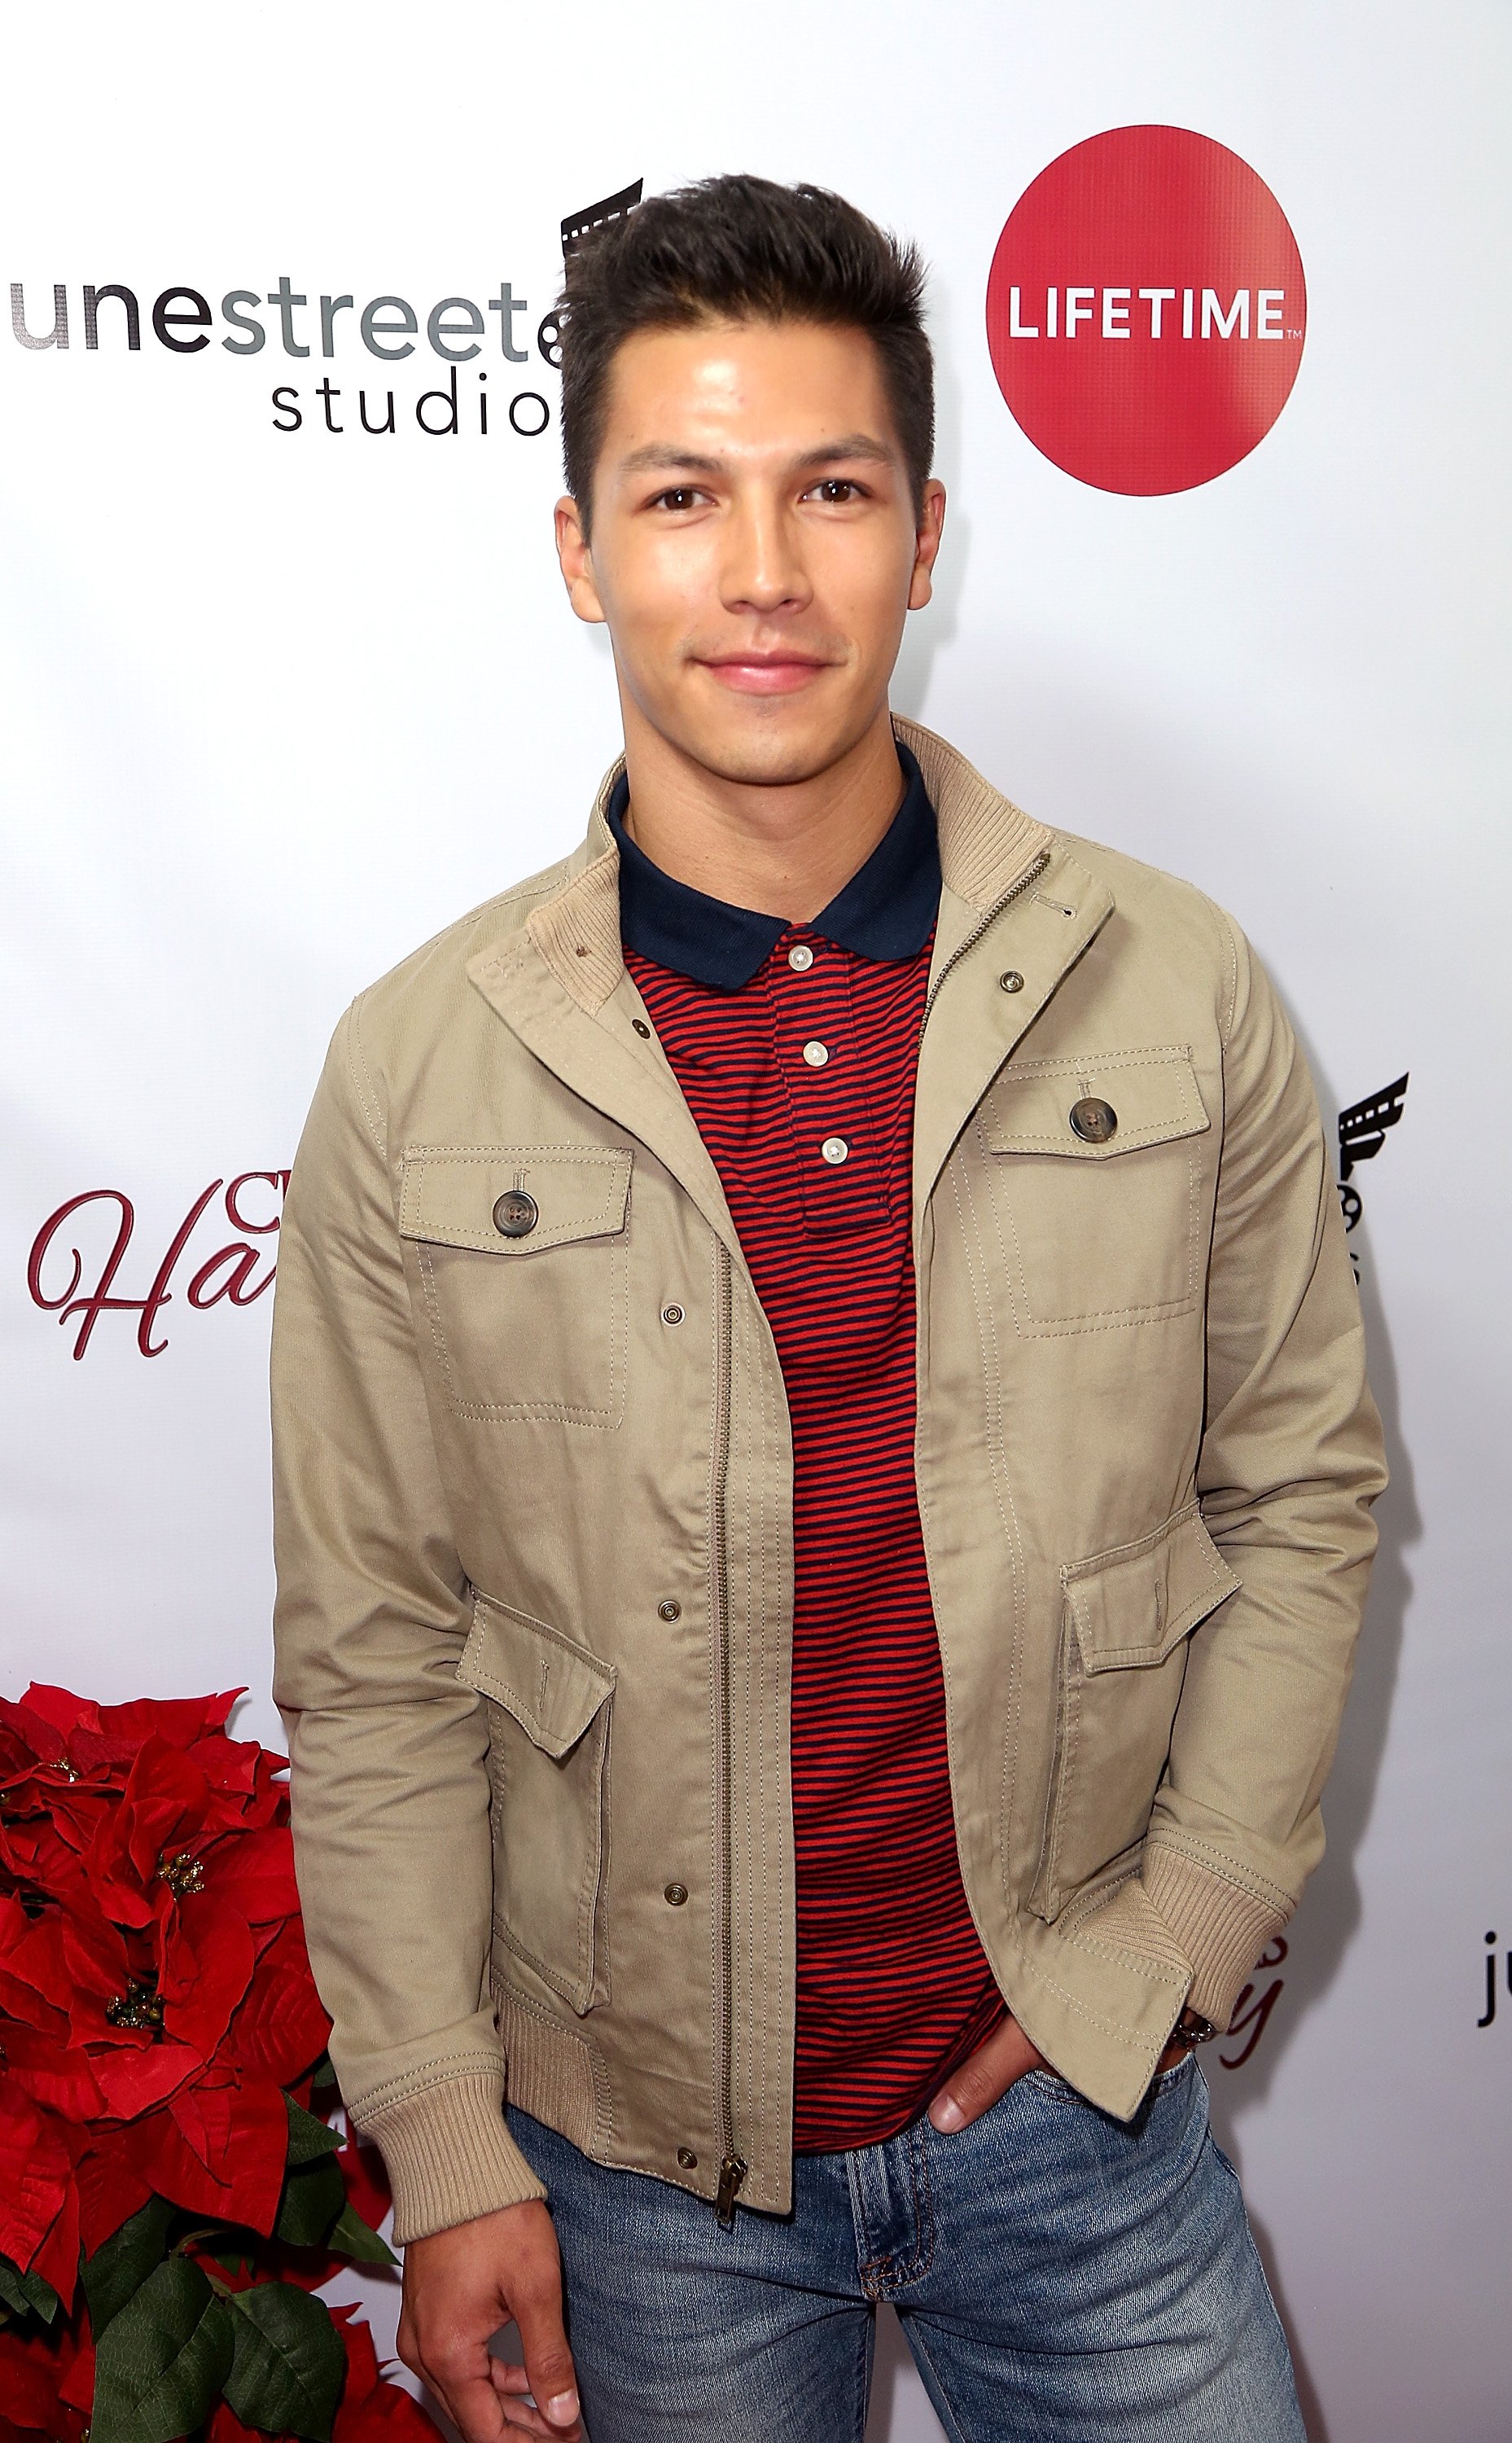 'General Hospital' actor Michael Blake Kruse wearing a red and black shirt, and a tan jacket.